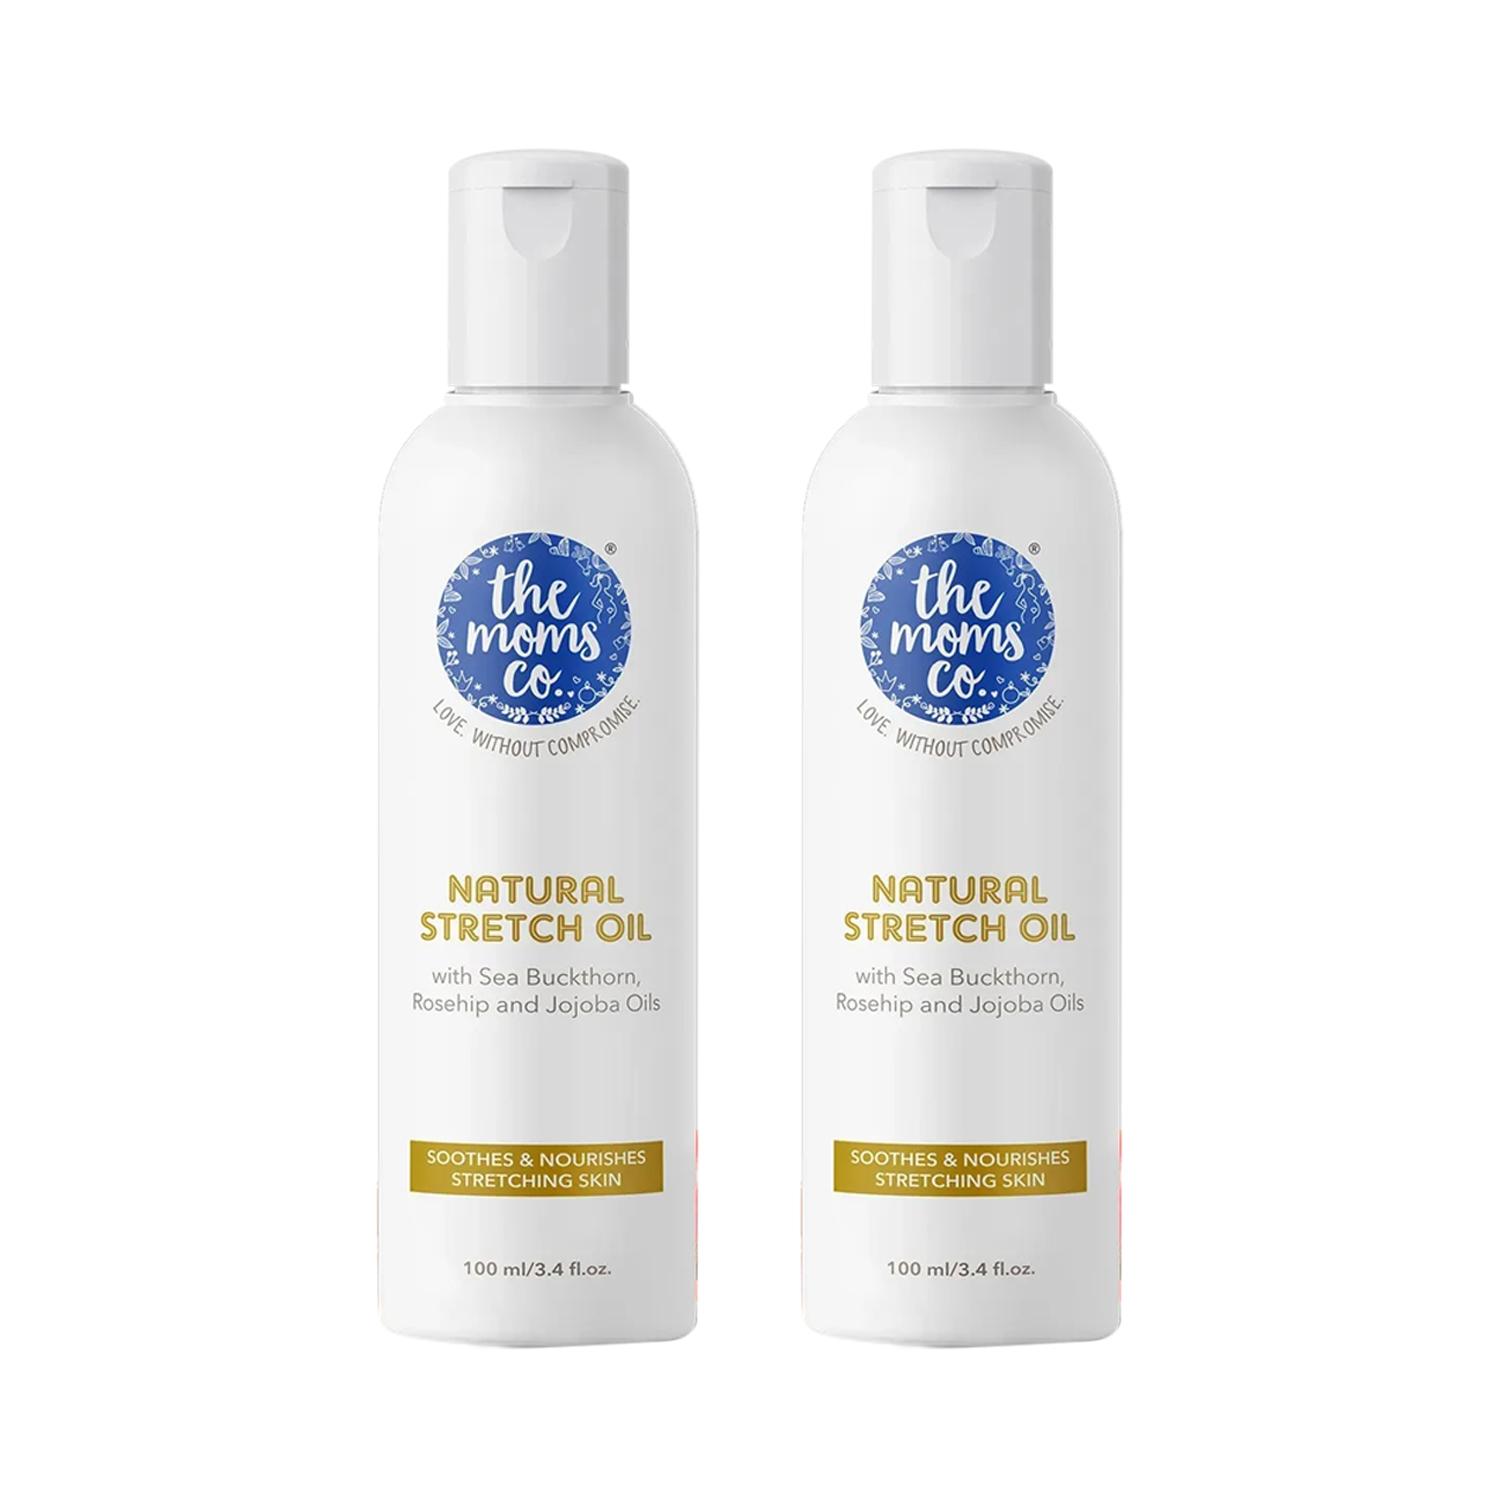 The Mom's Co. | The Mom's Co. Natural Stretch Oil (100ml) & Natural Stretch Oil (100ml) Combo